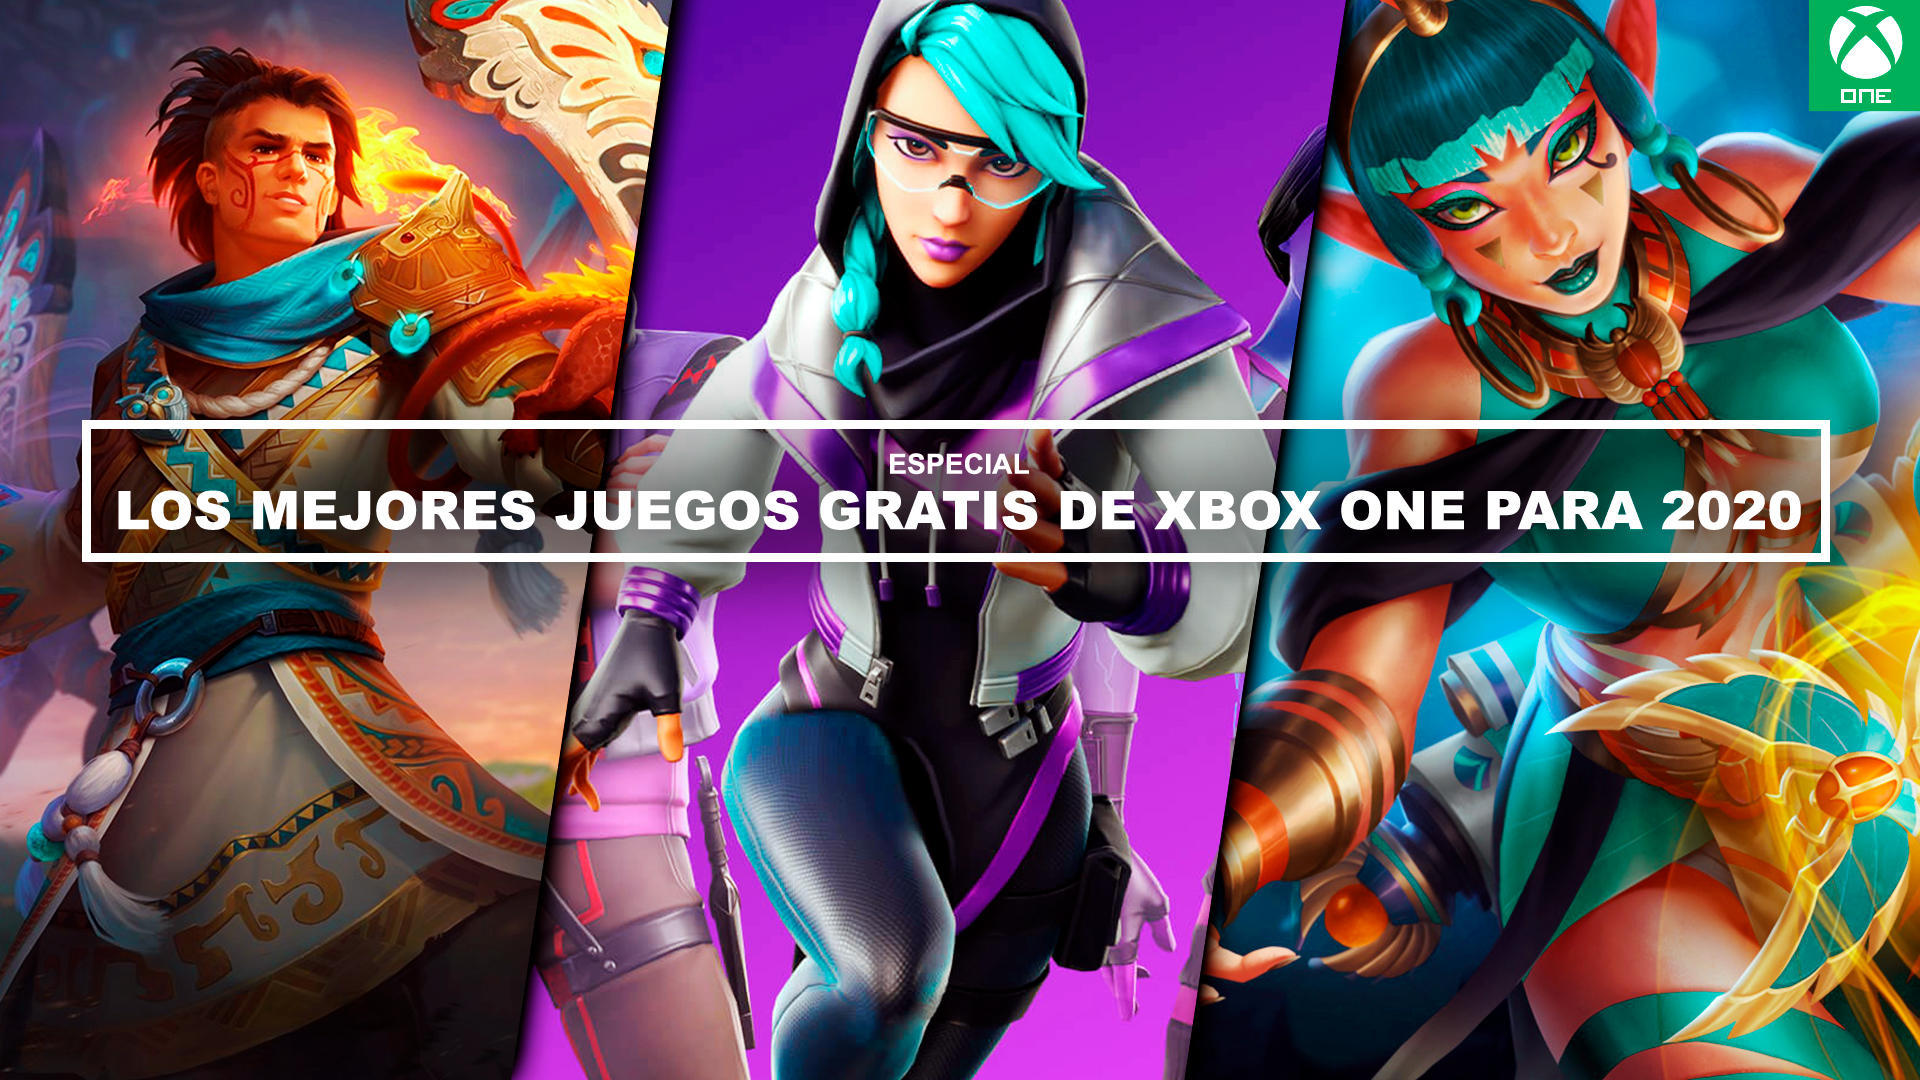 Los Free To Play Xbox Sin Online De Pago : The Best Free Games For Pc Steam And More Of 2020 ...